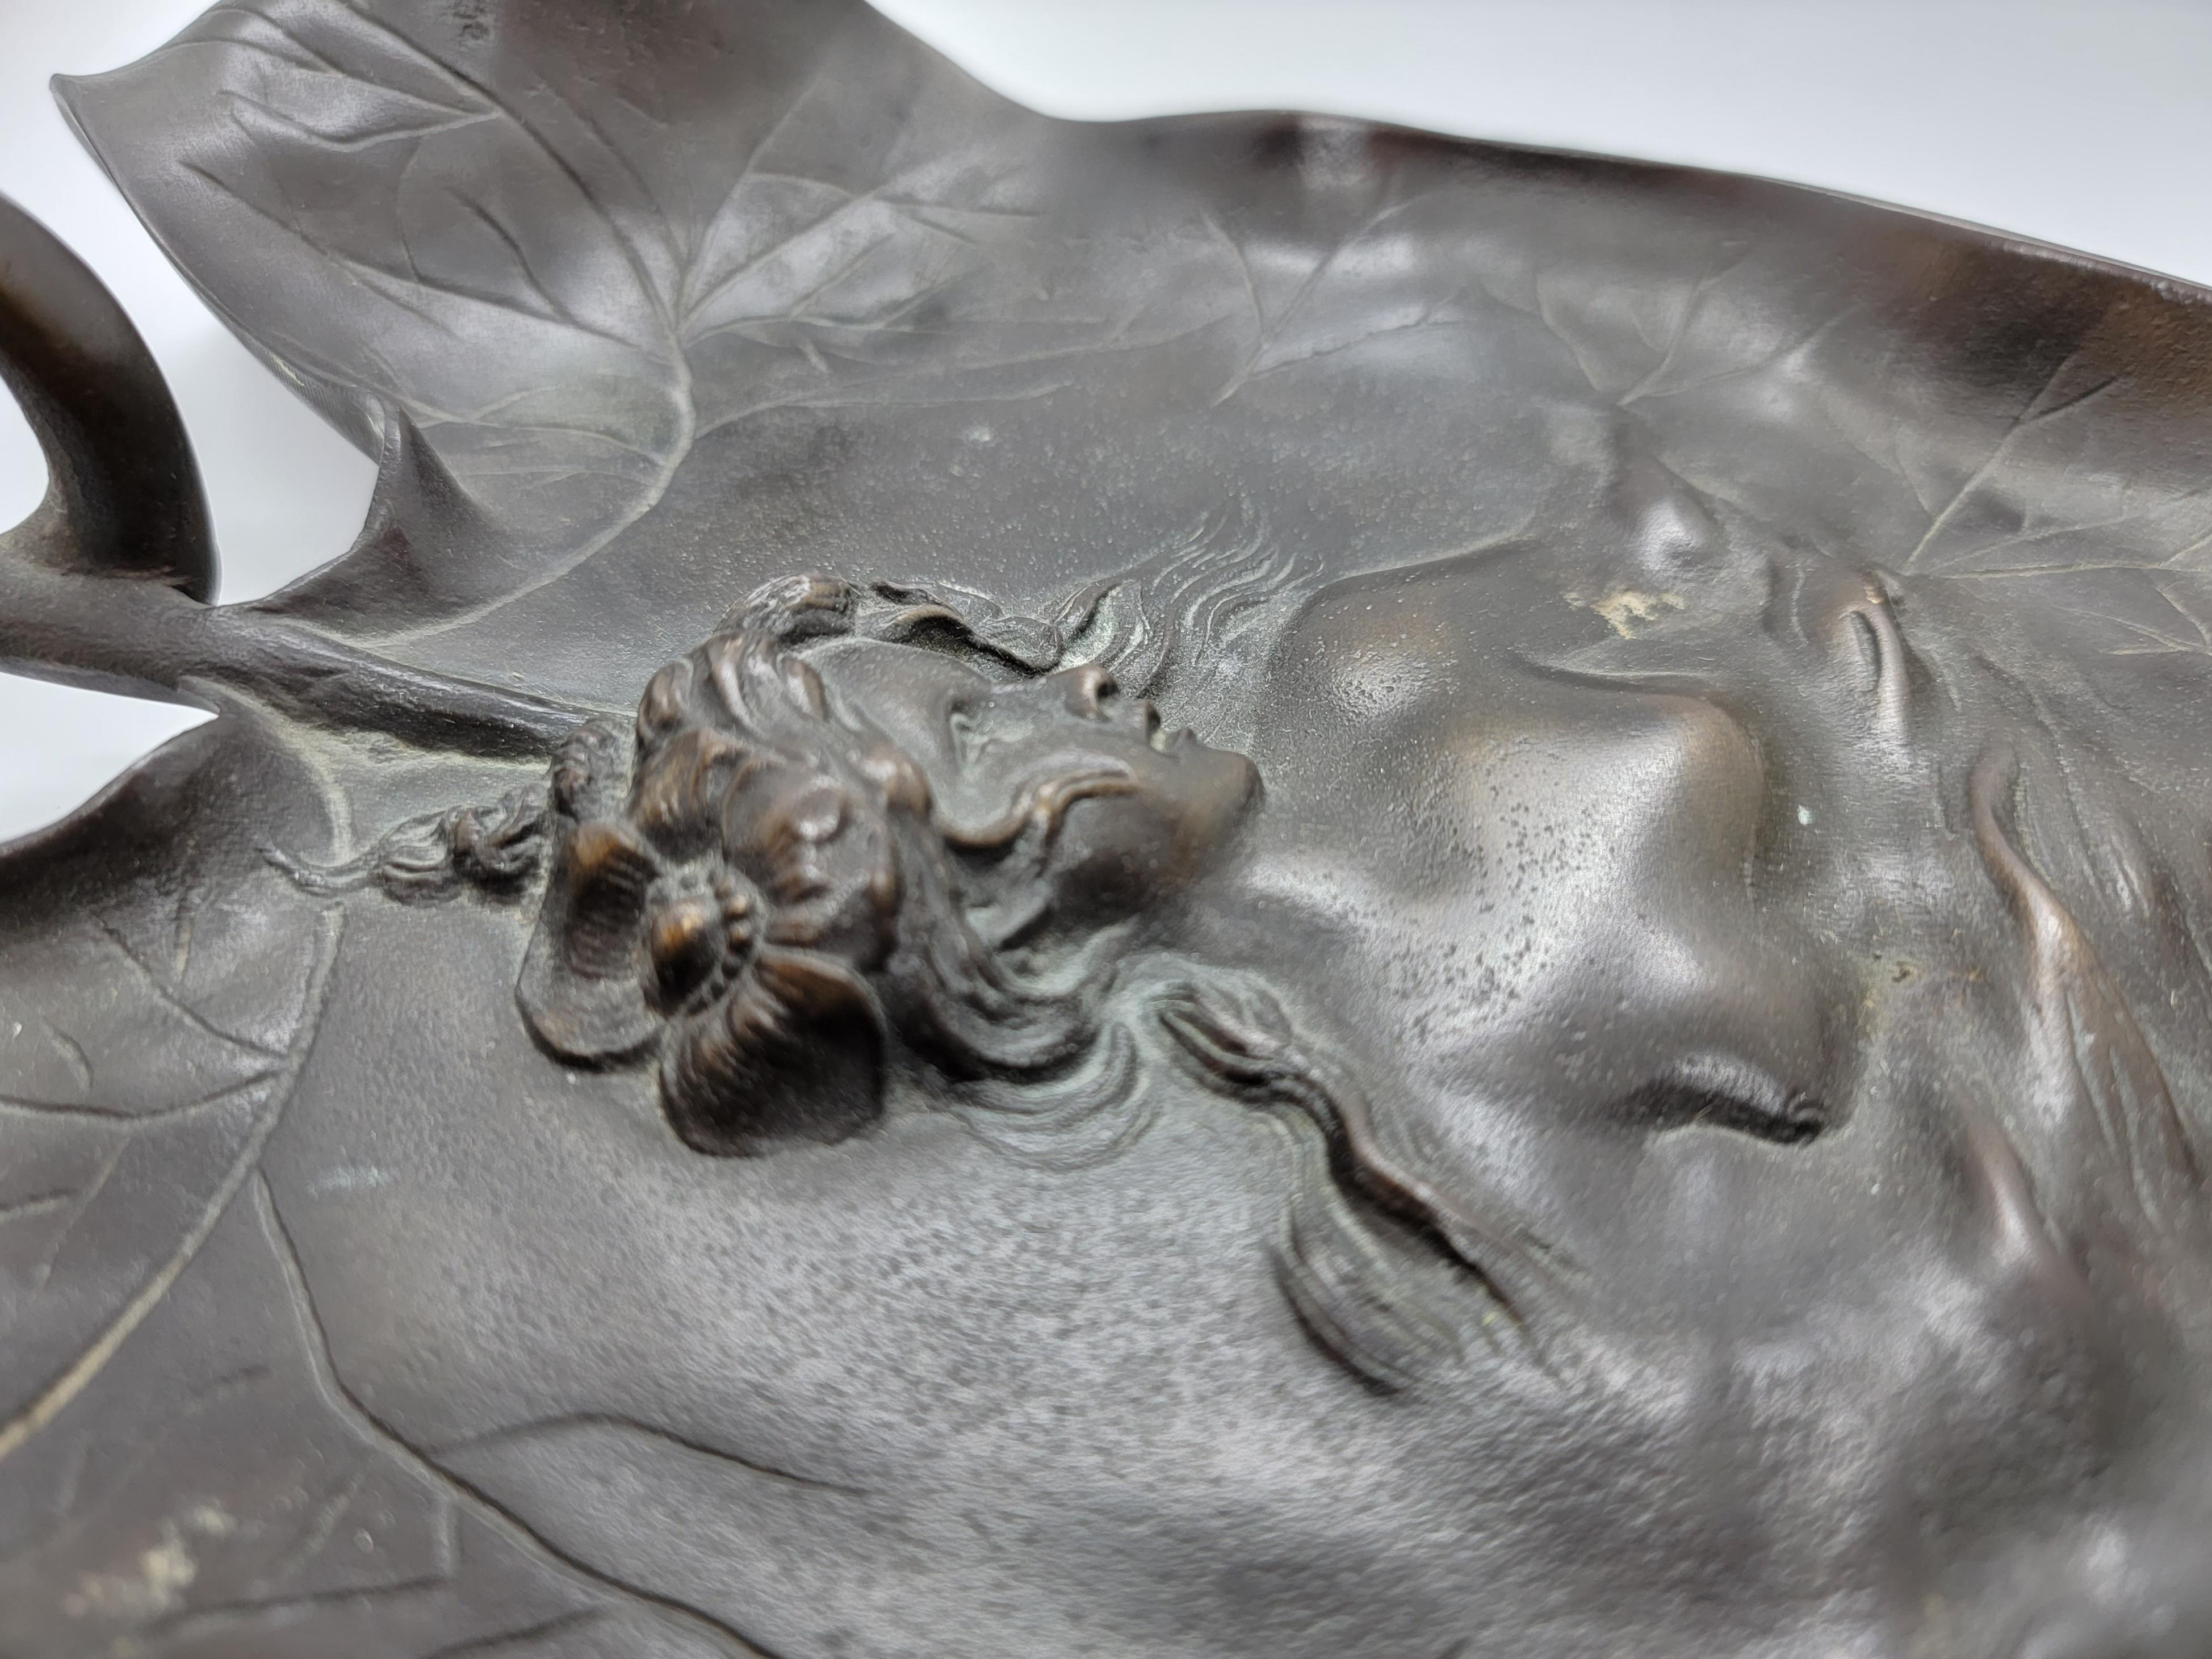 Pair of Decorative Leaf Molds W/Womans Figure. the upper body of a nude woman is show as the decorative center piece within this centerpiece/bowl very elegant and very sleek looking